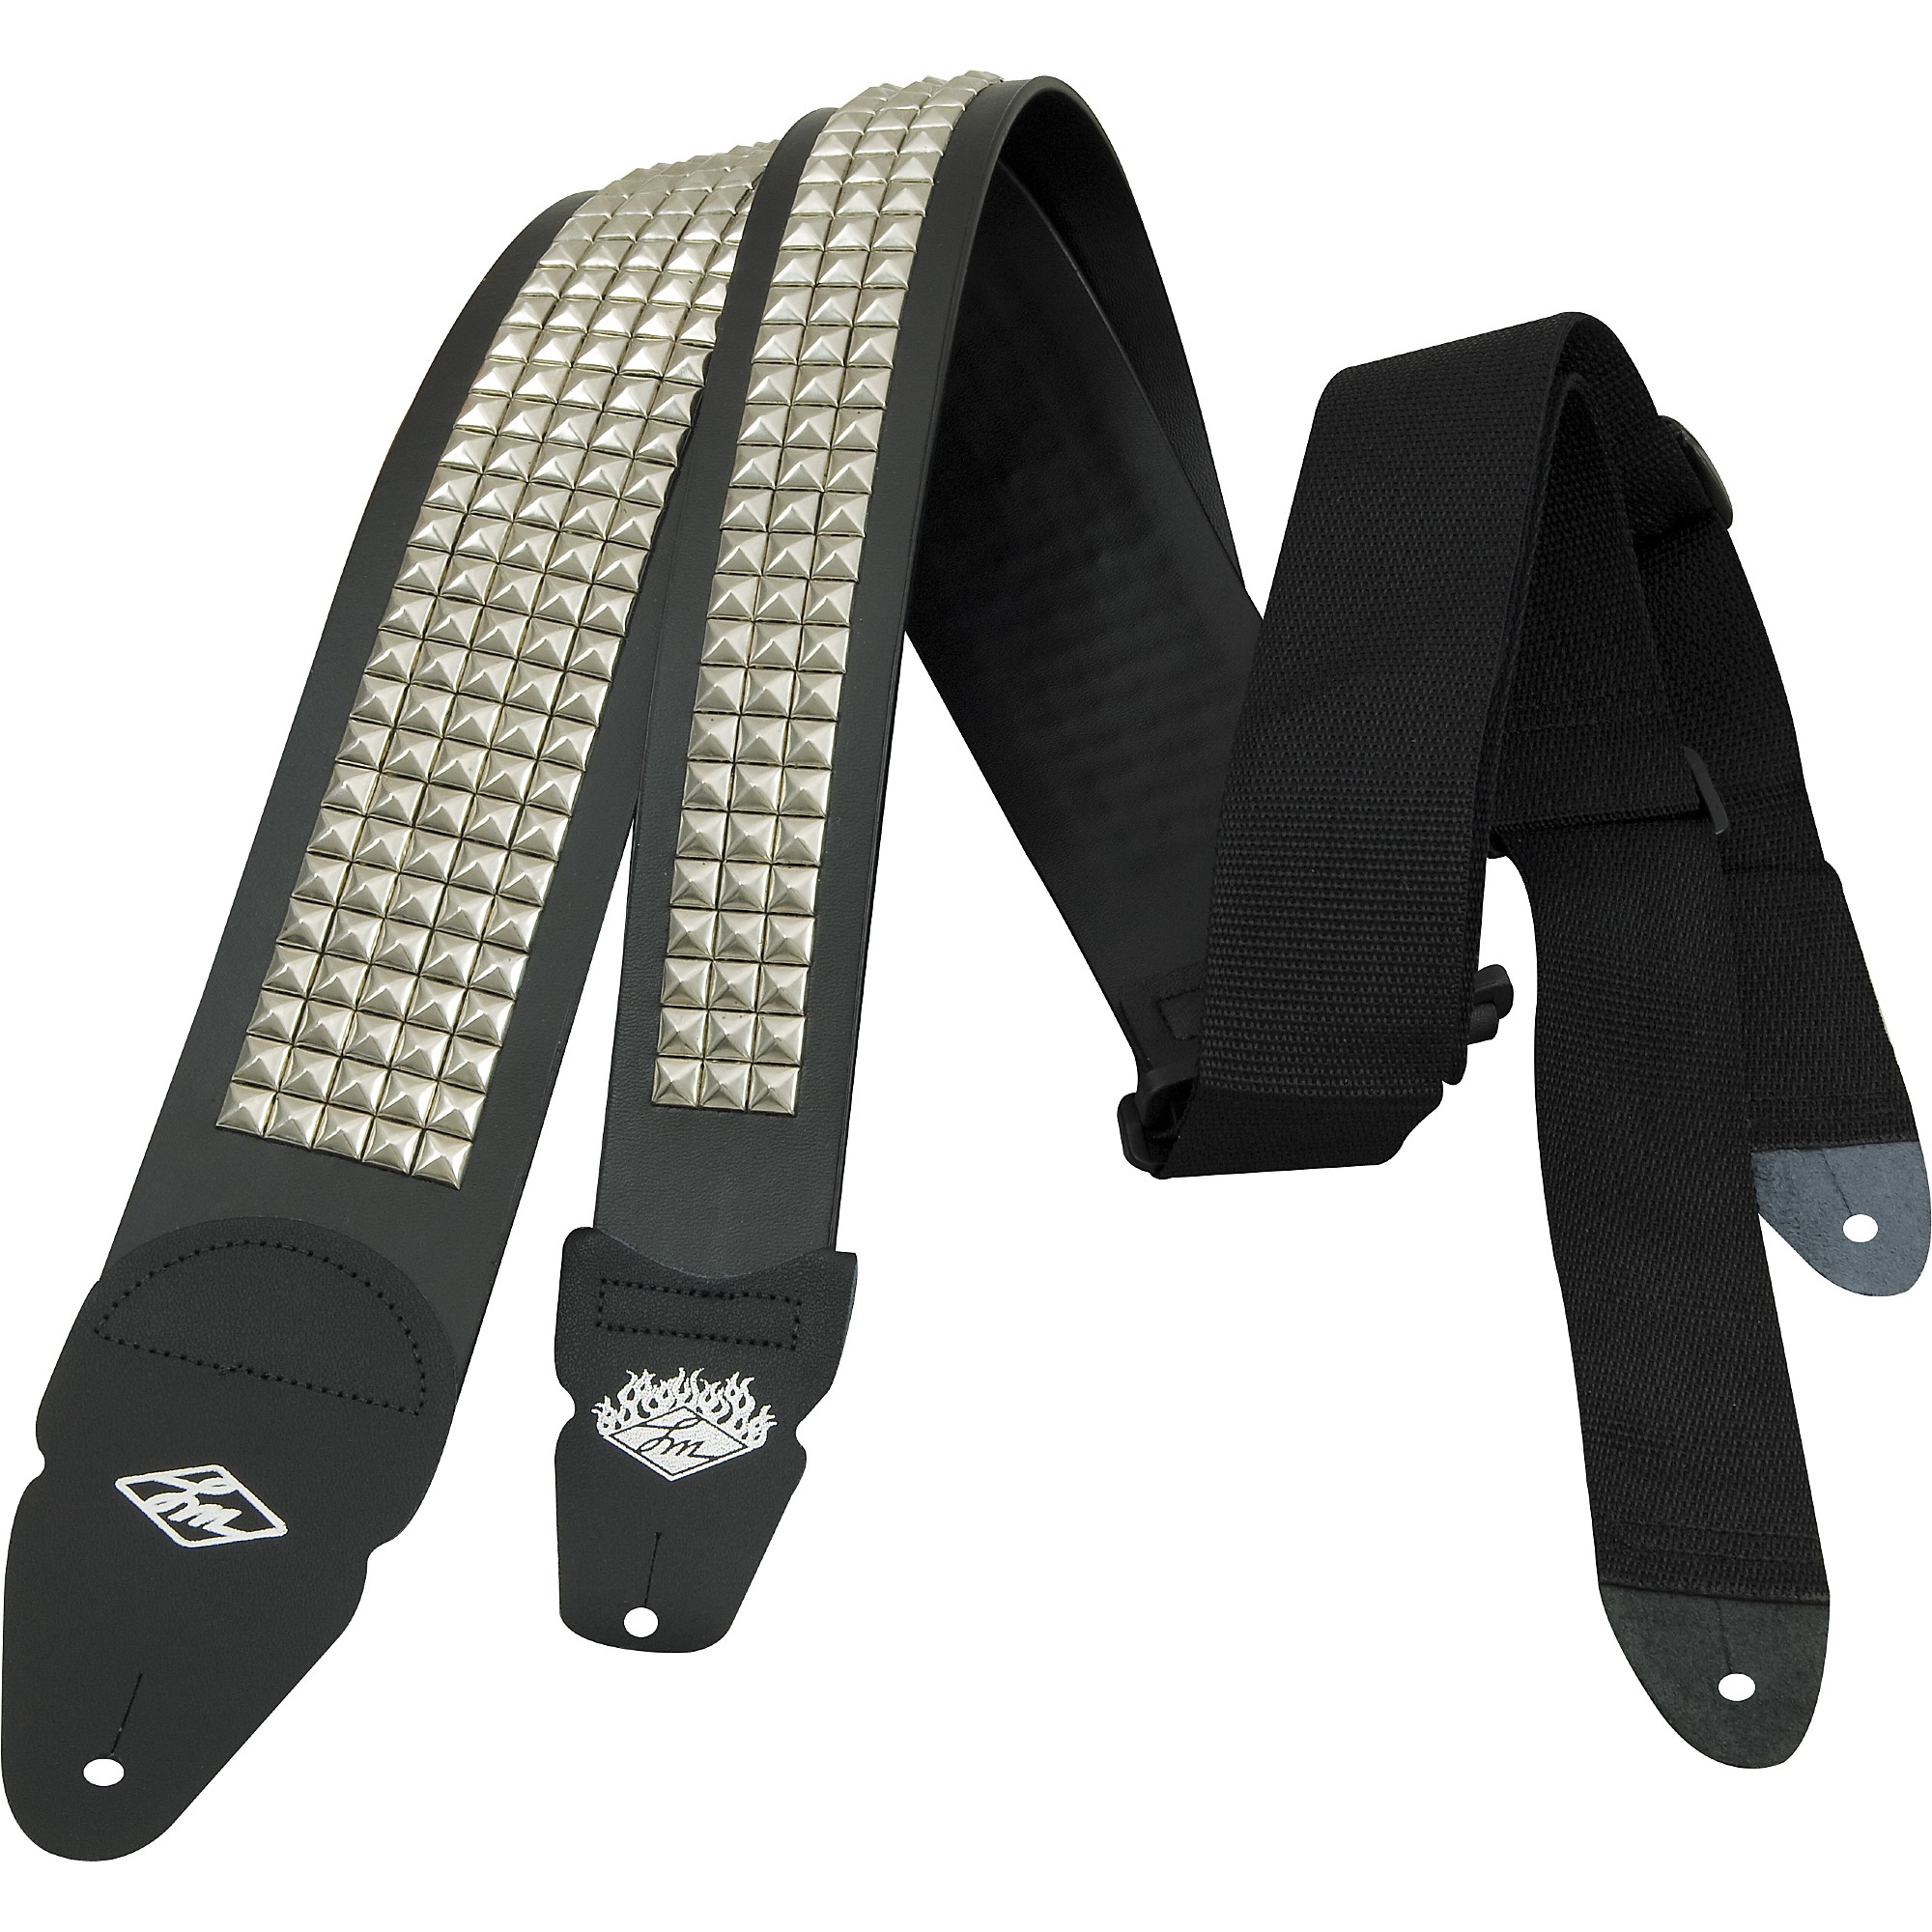 LM Products 2-inch Macrame Cotton Guitar Strap with Leather Ends